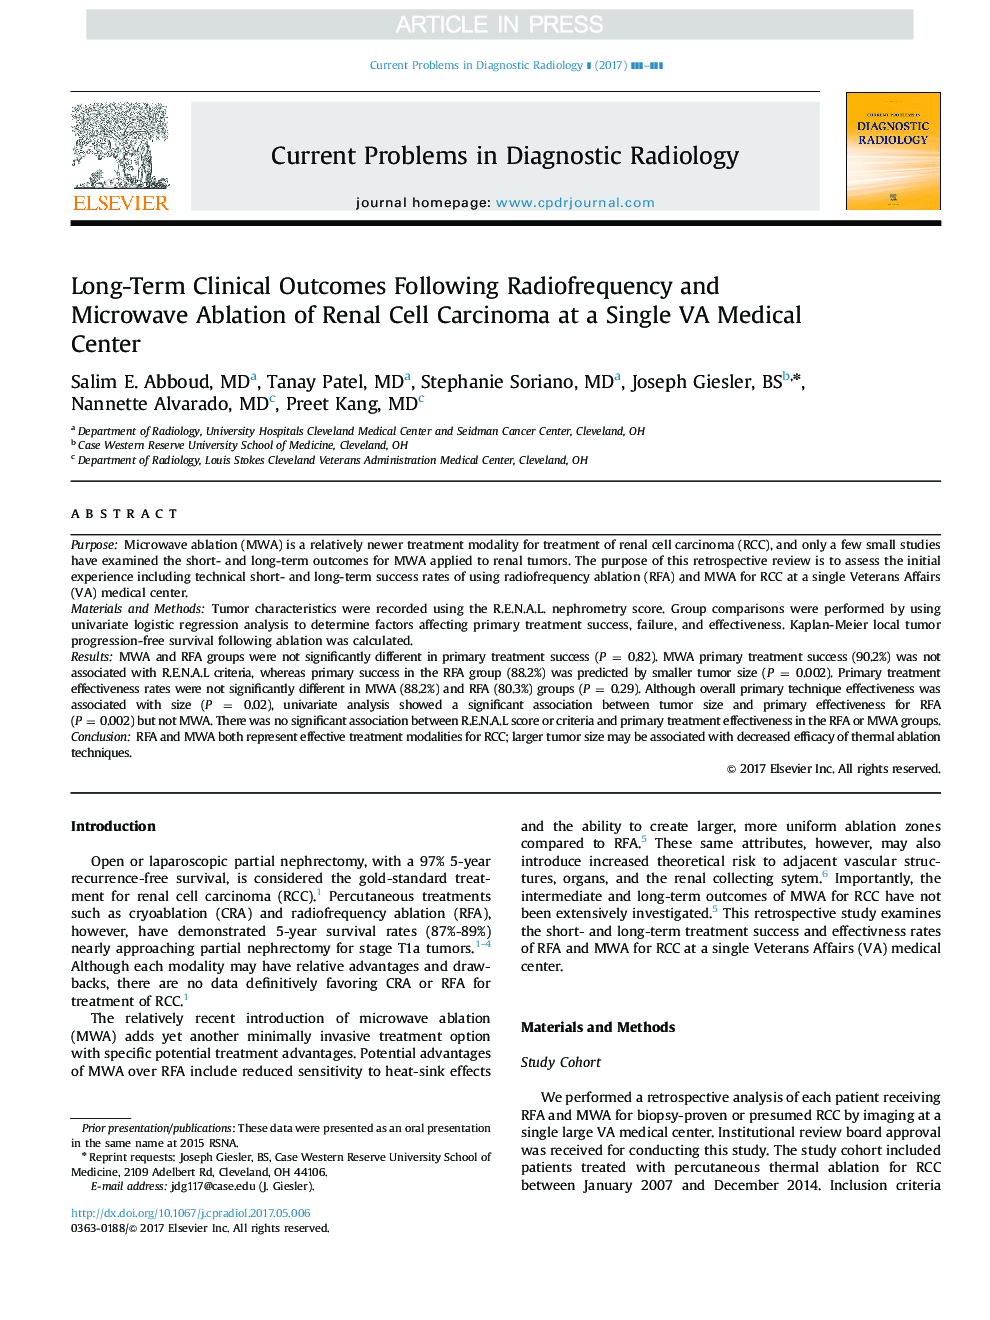 Long-Term Clinical Outcomes Following Radiofrequency and Microwave Ablation of Renal Cell Carcinoma at a Single VA Medical Center